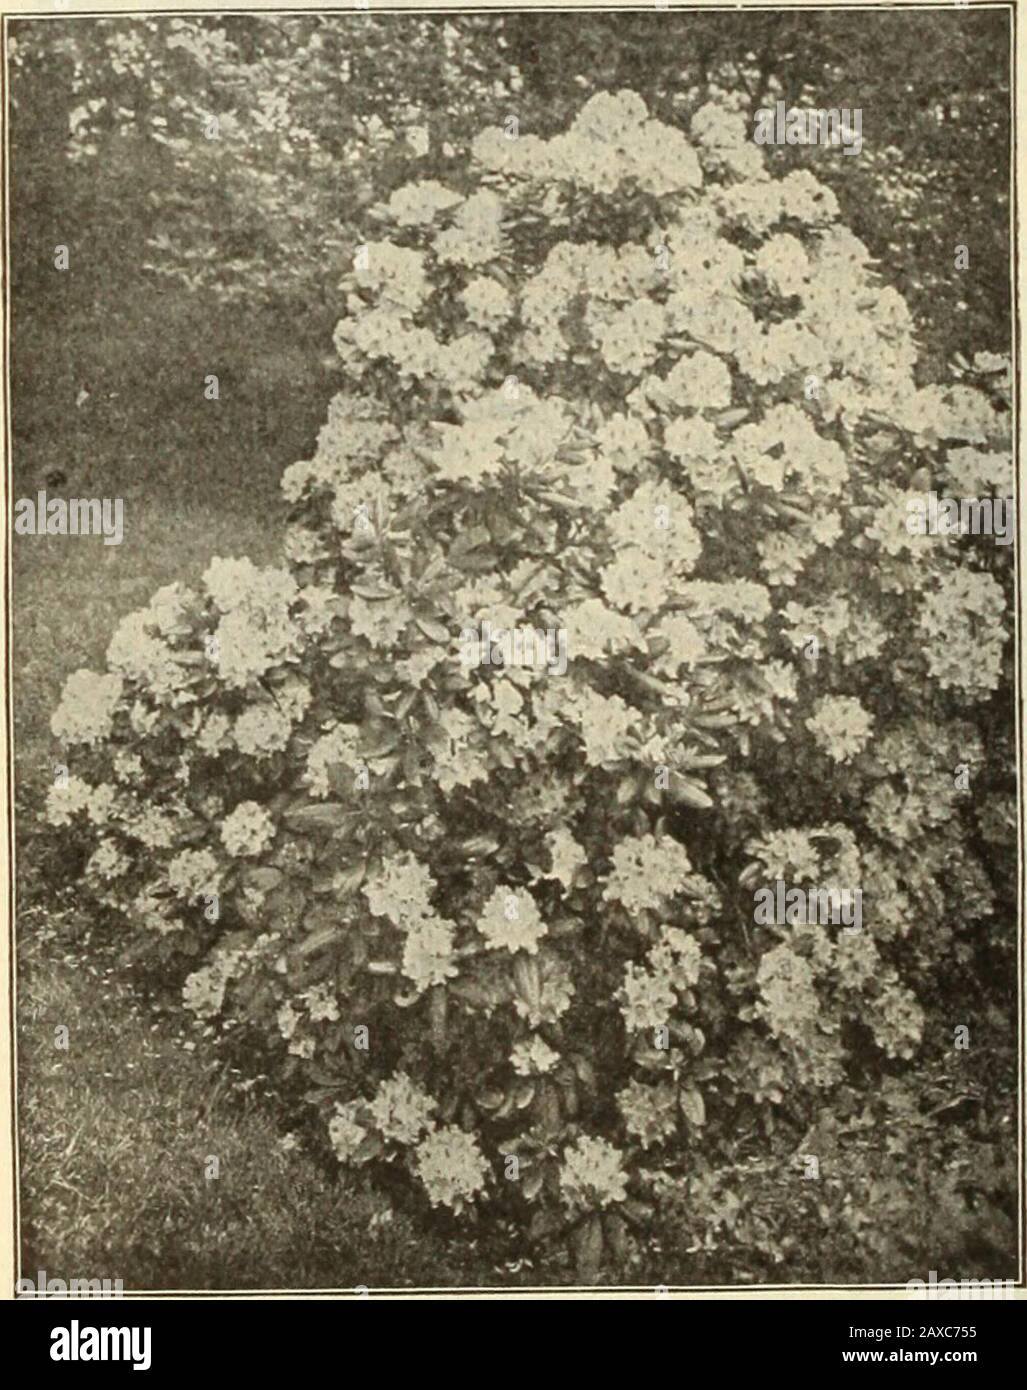 Dreer's garden book : seventy-fourth annual edition 1912 . ::ing in pots.Vagans Alba {Cnrnish Heath). Of compact growth, with upright clusters of pink flowers. — Rubra. Similar to above, but with rosy-red flowers.Bruckenthalia Spiculifolia. A Ileath closely allied to the Erica family, with hue, needle-like leaves and light pinkflower heads in June. Price, any of the above, 50 cts. each; $5.00 per doz. Set of5 sorts, $2.00. EUOXY:&gt;irS (SpindleXree). Upright or decumbent evergreen Shrubs, growing best ia light,sandy soil; splendid subjects for seashore planting.Japonica. Of upright growth, wi Stock Photo